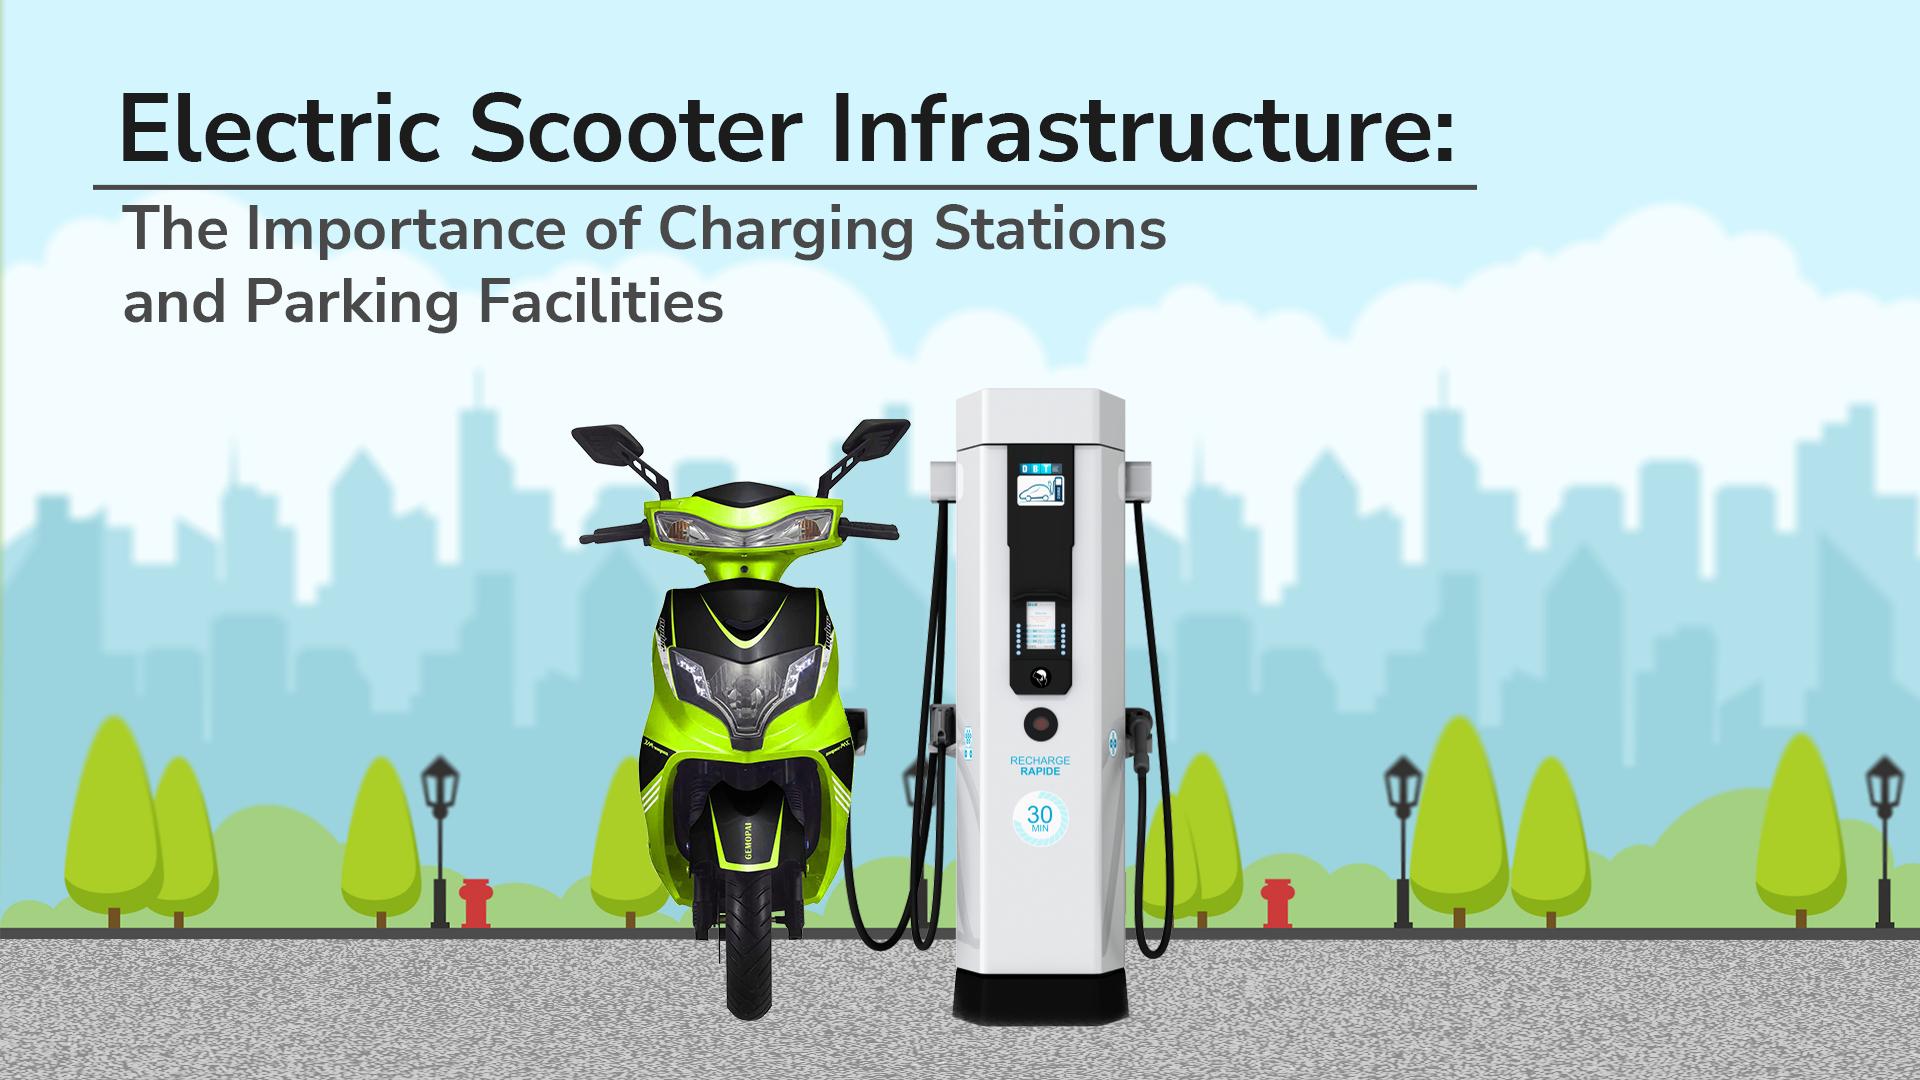 Electric Scooter Infrastructure: Importance of Charging Stations